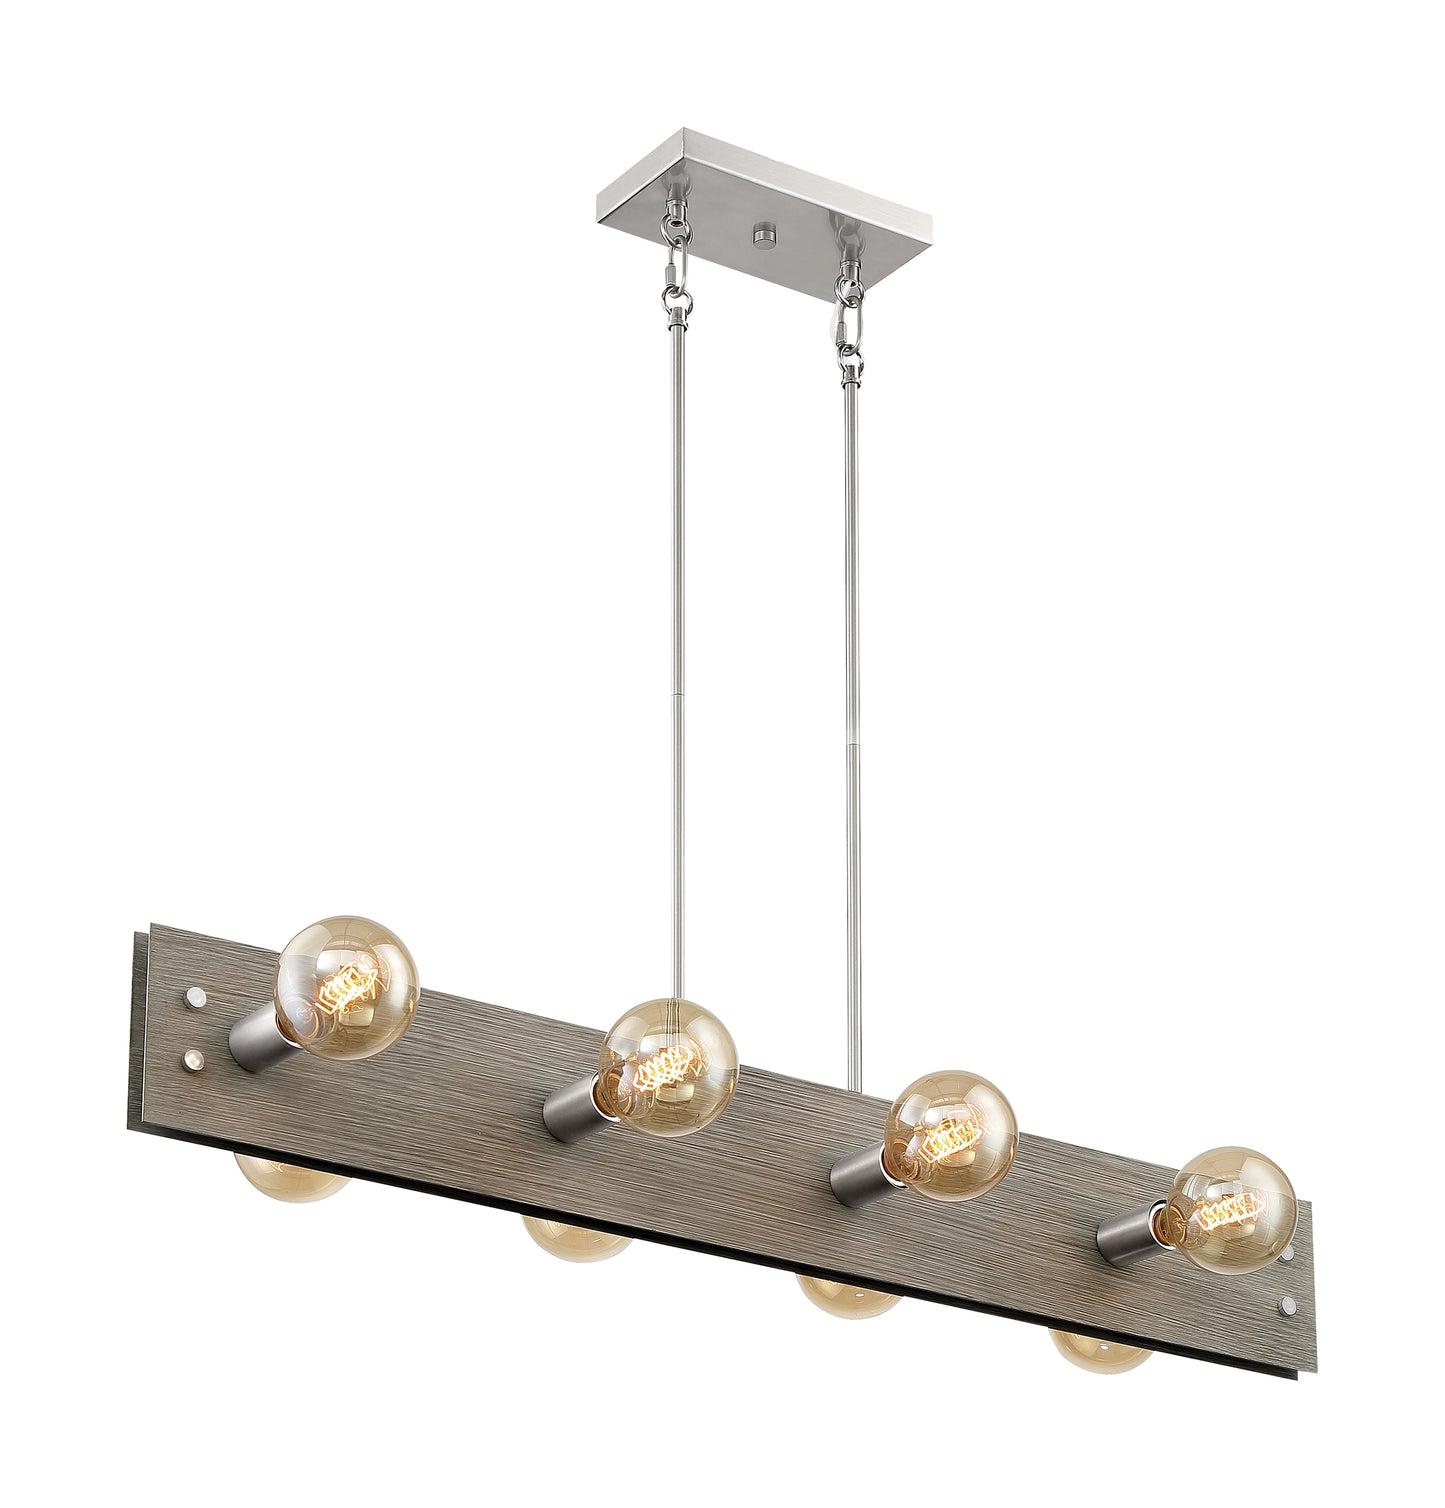 Stella - 8 Light Island Pendant with Driftwood - Brushed Nickel Accents Finish